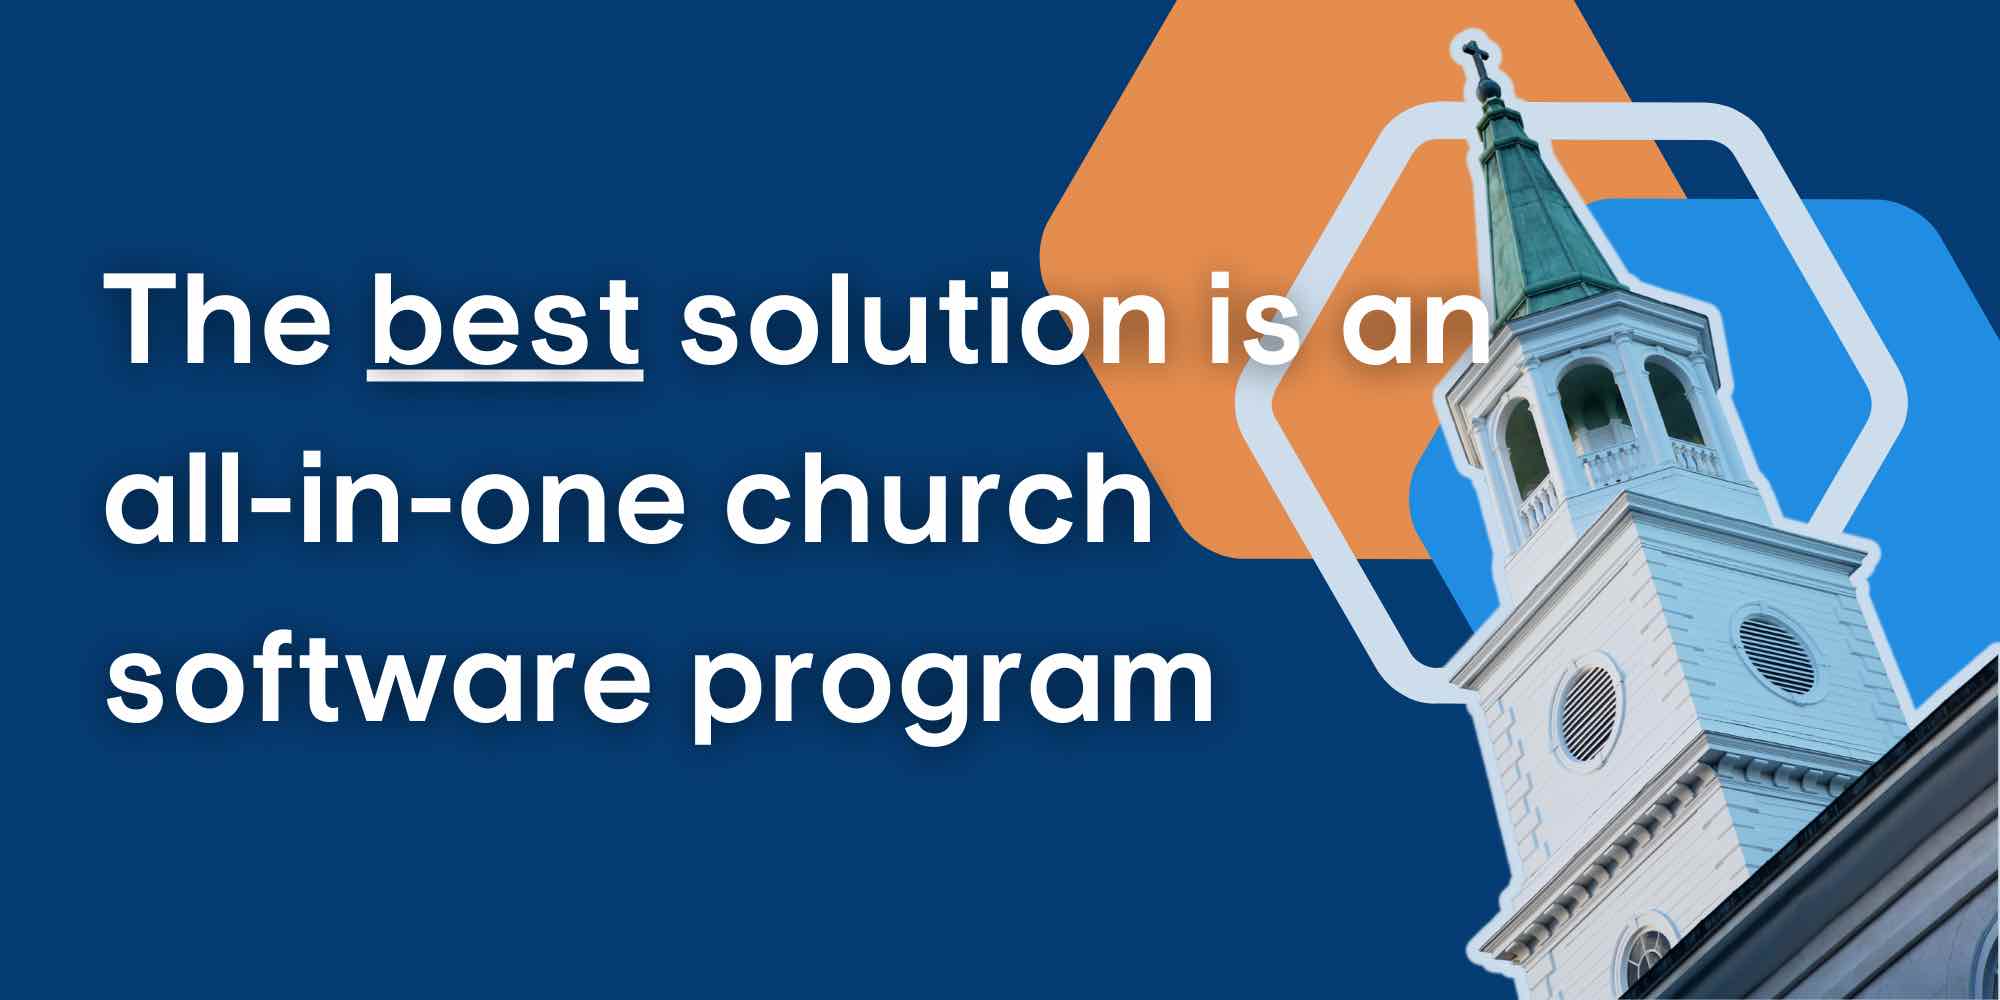 An all-in-one church management software is the best solution